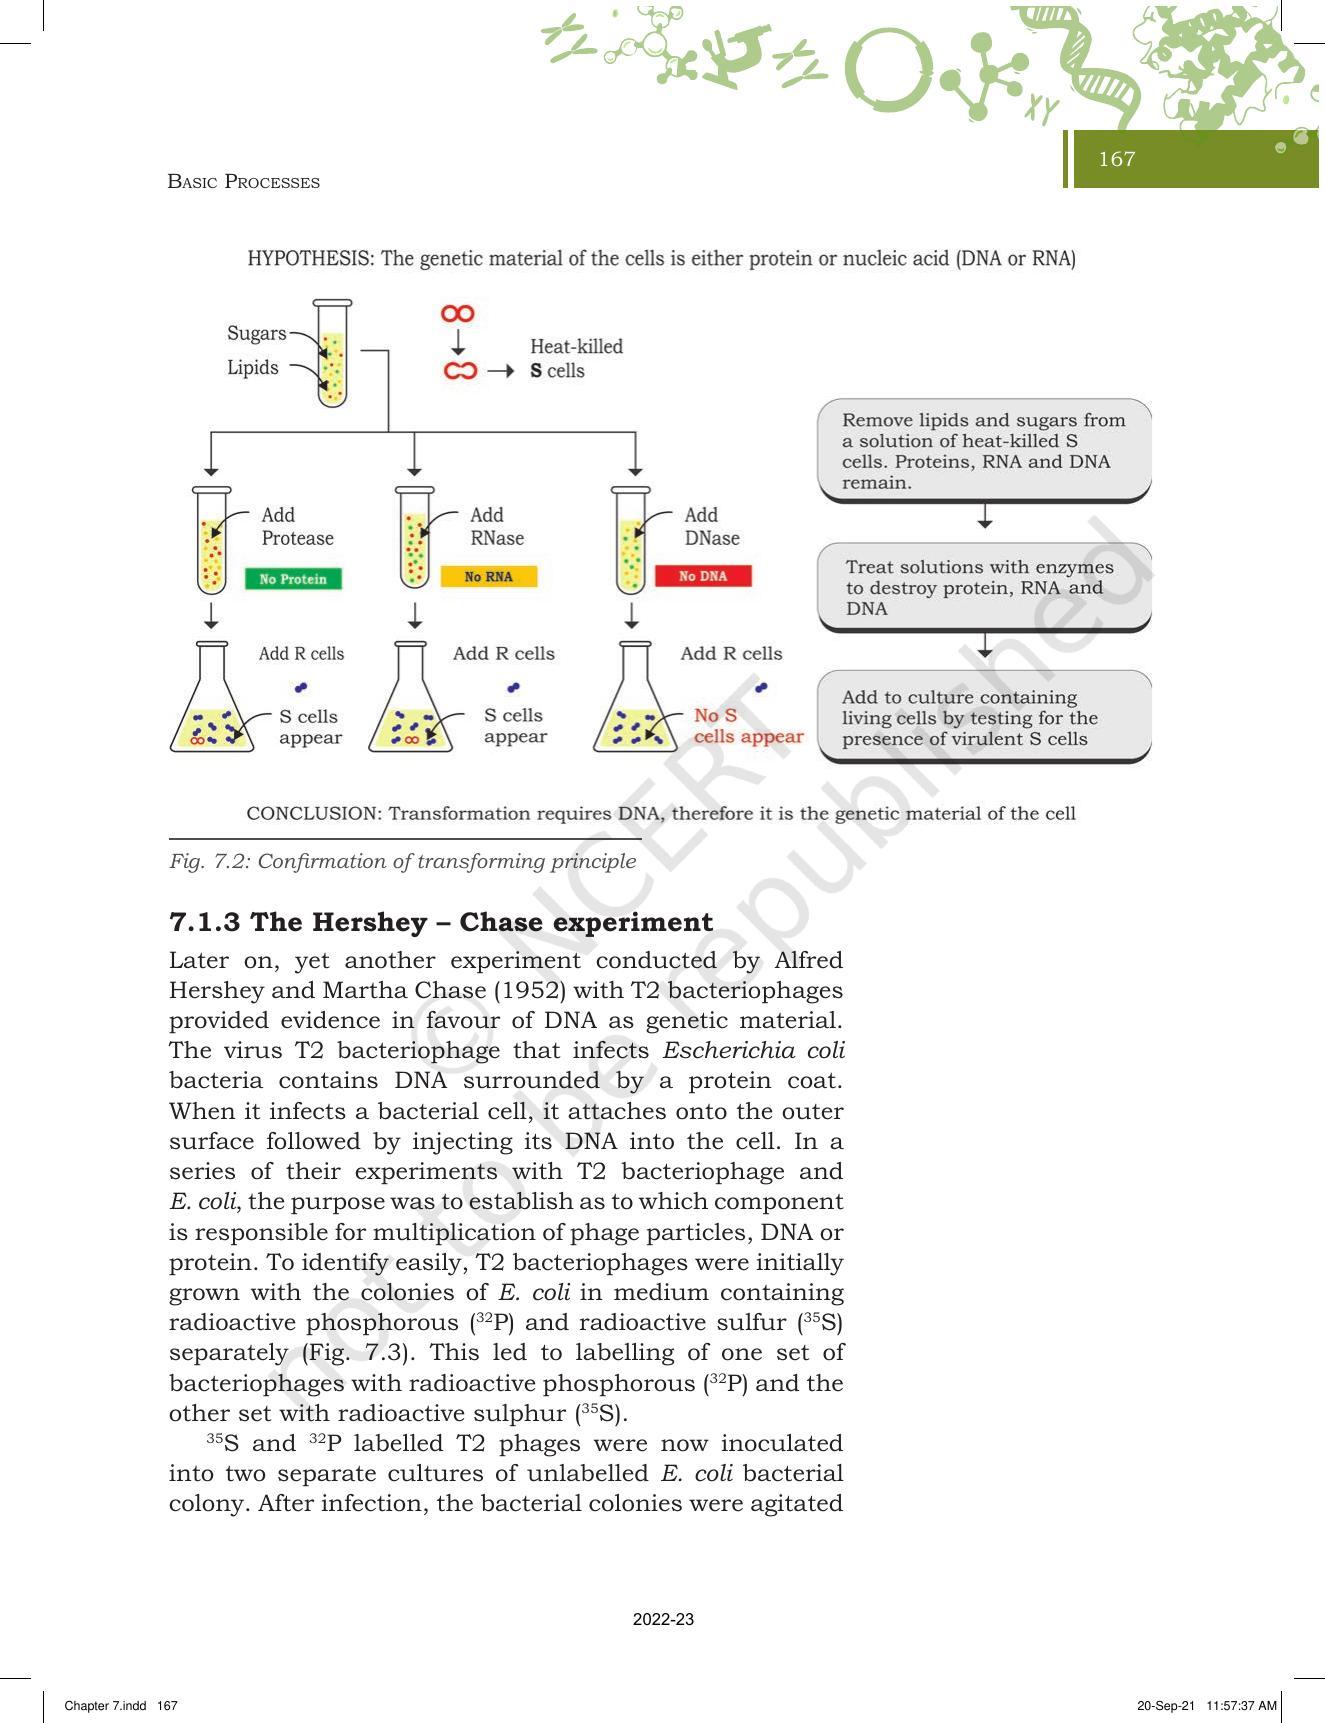 NCERT Book for Class 11 Biotechnology Chapter 7 Basic Processes - Page 4